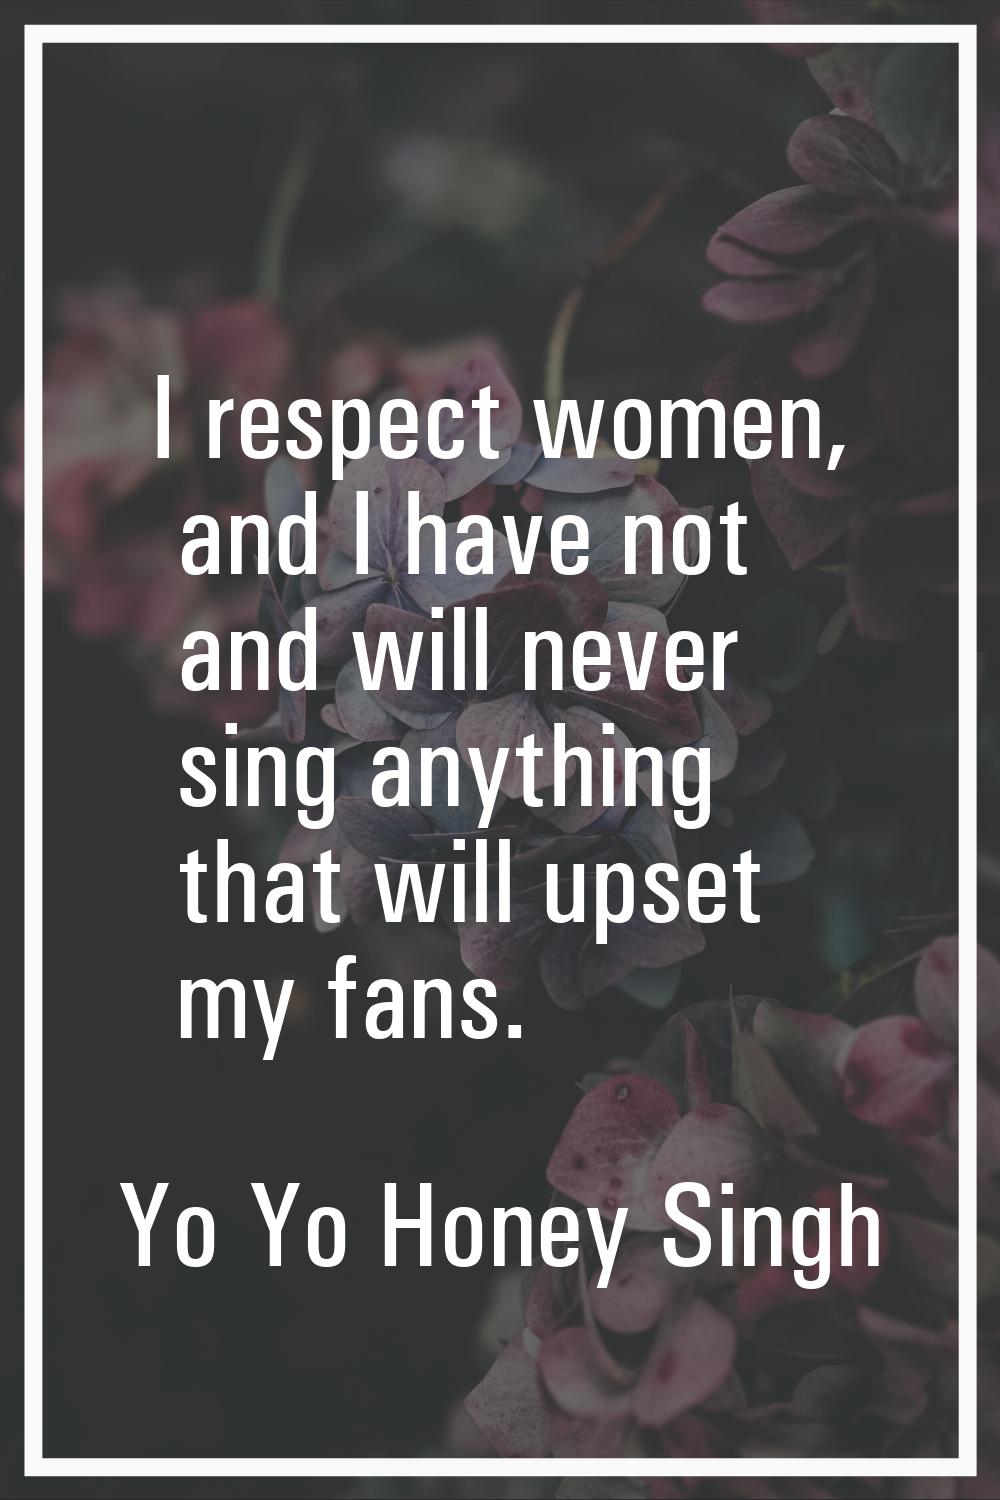 I respect women, and I have not and will never sing anything that will upset my fans.